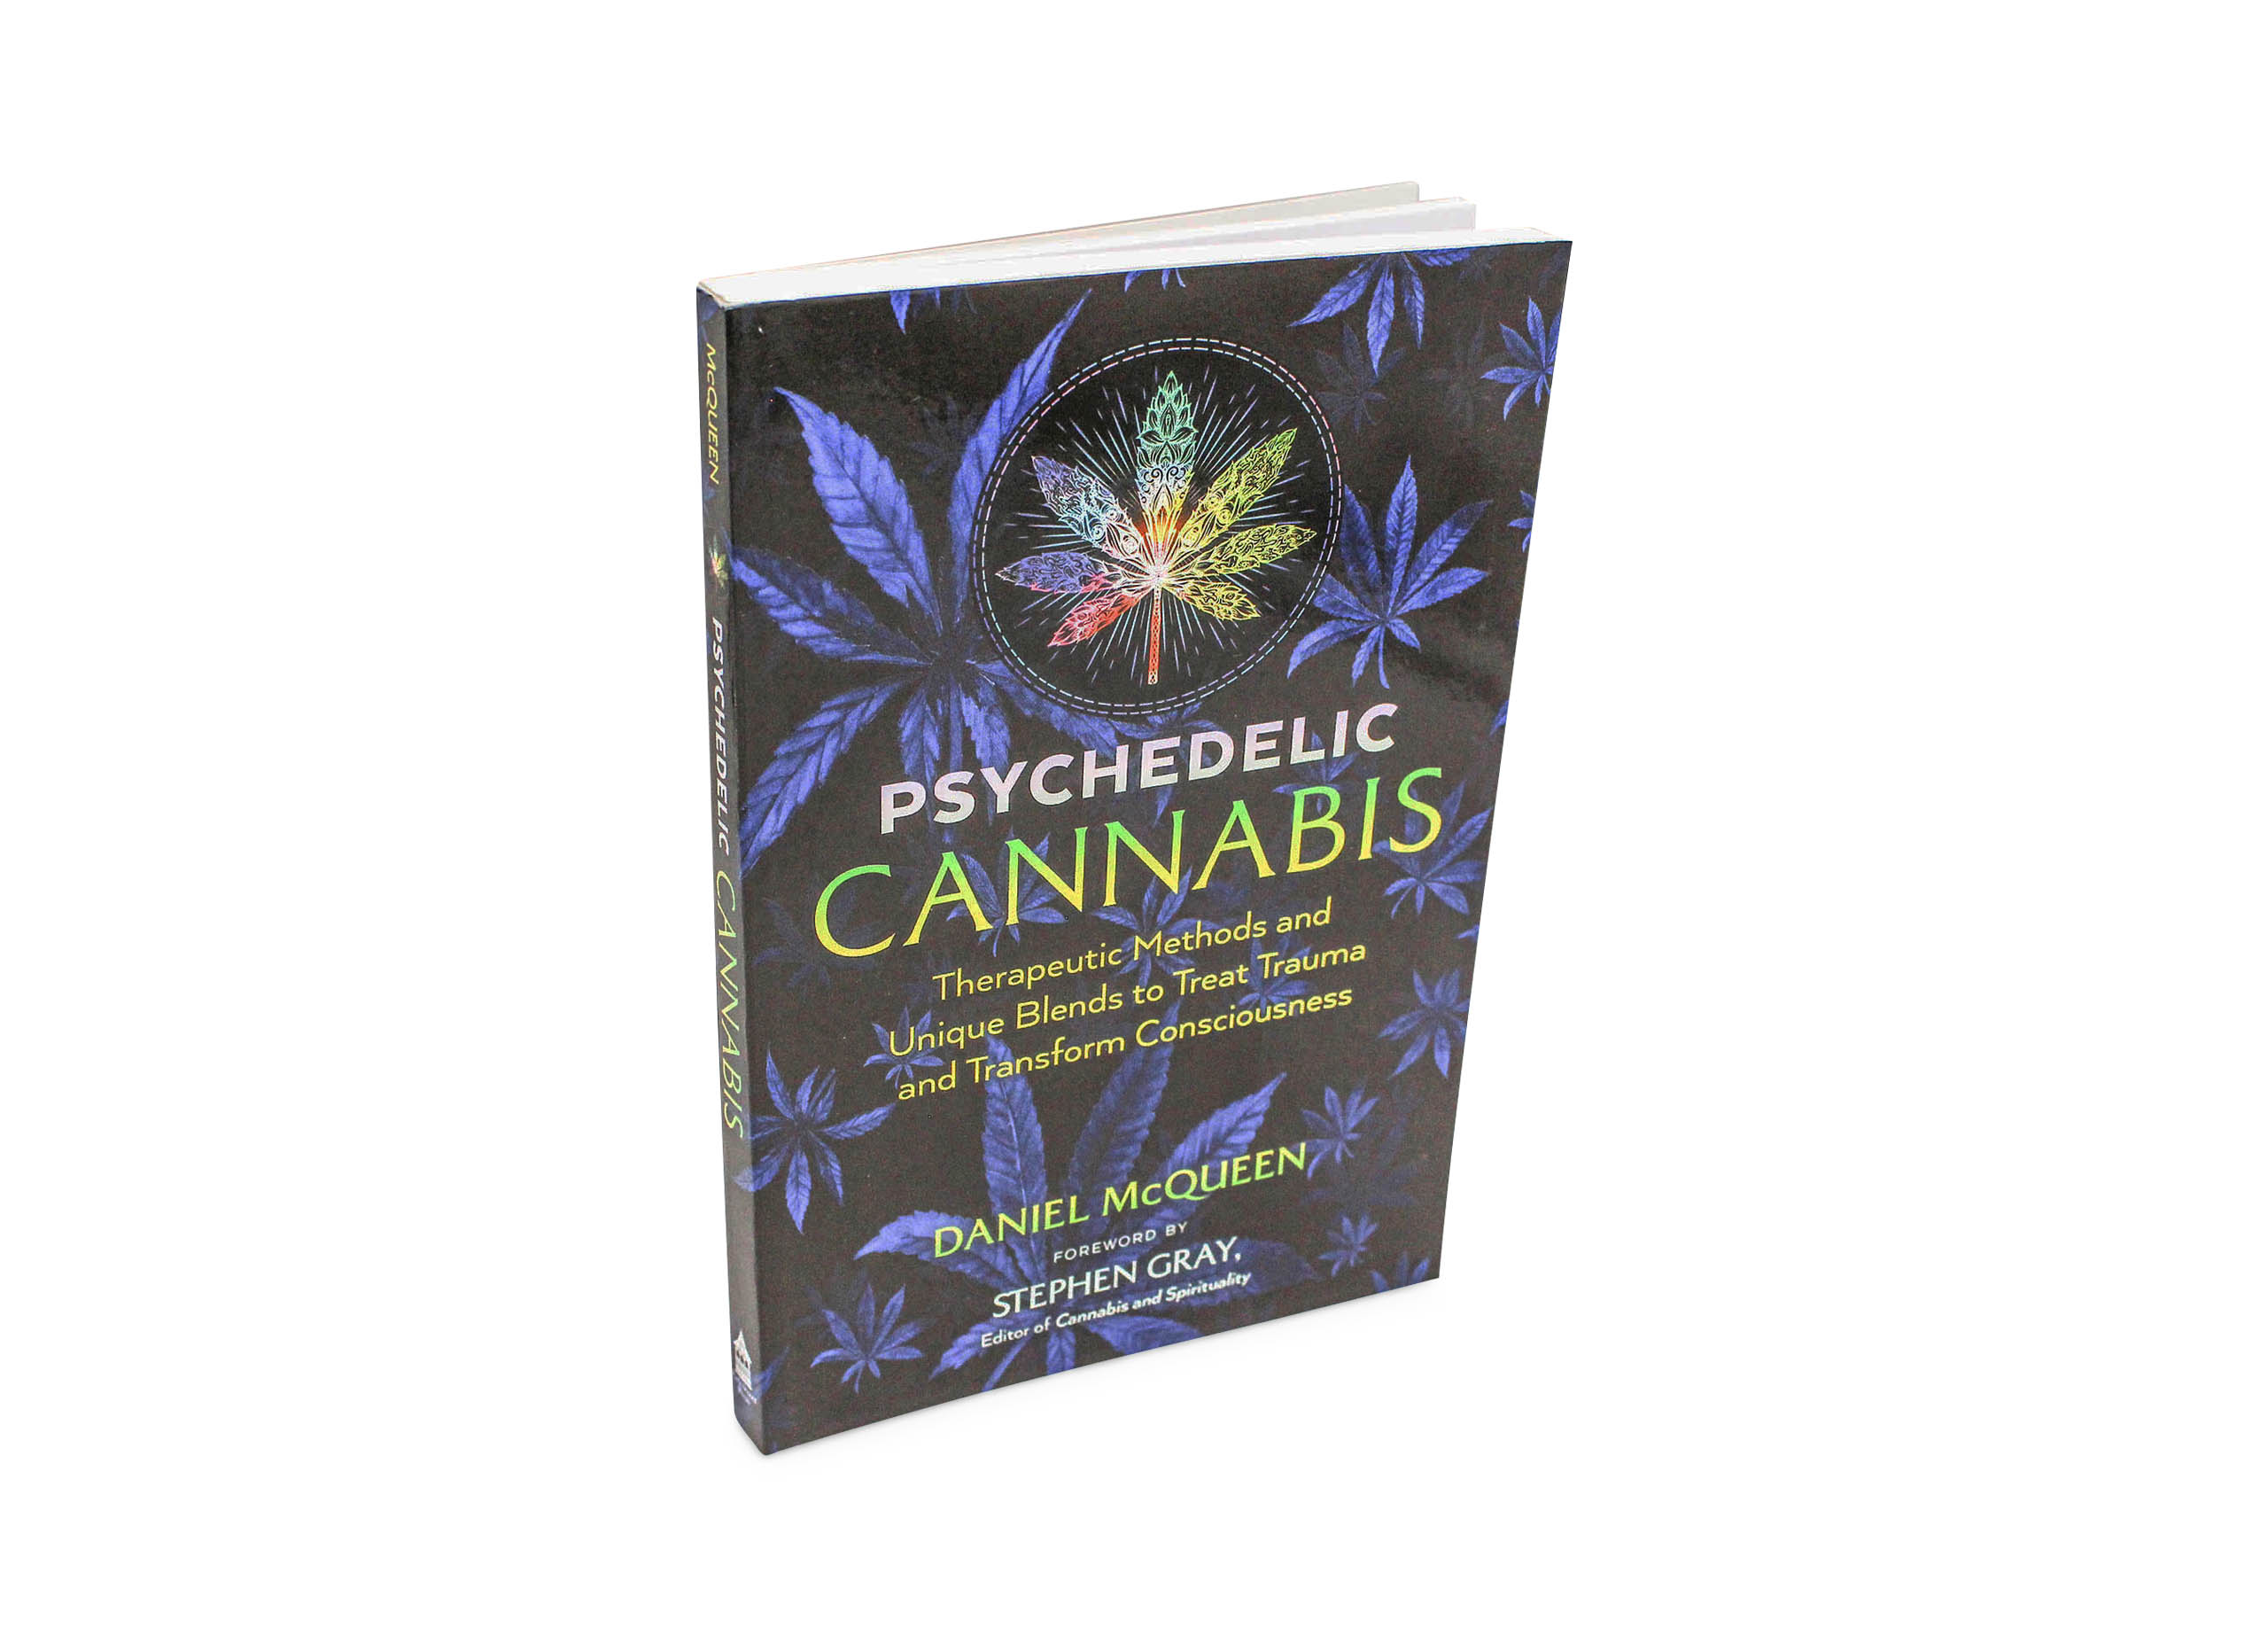 Psychedelic Cannabis: Therapeutic Methods and Unique Blends to Treat Trauma and Transform Consciousness-Crystal Dreams